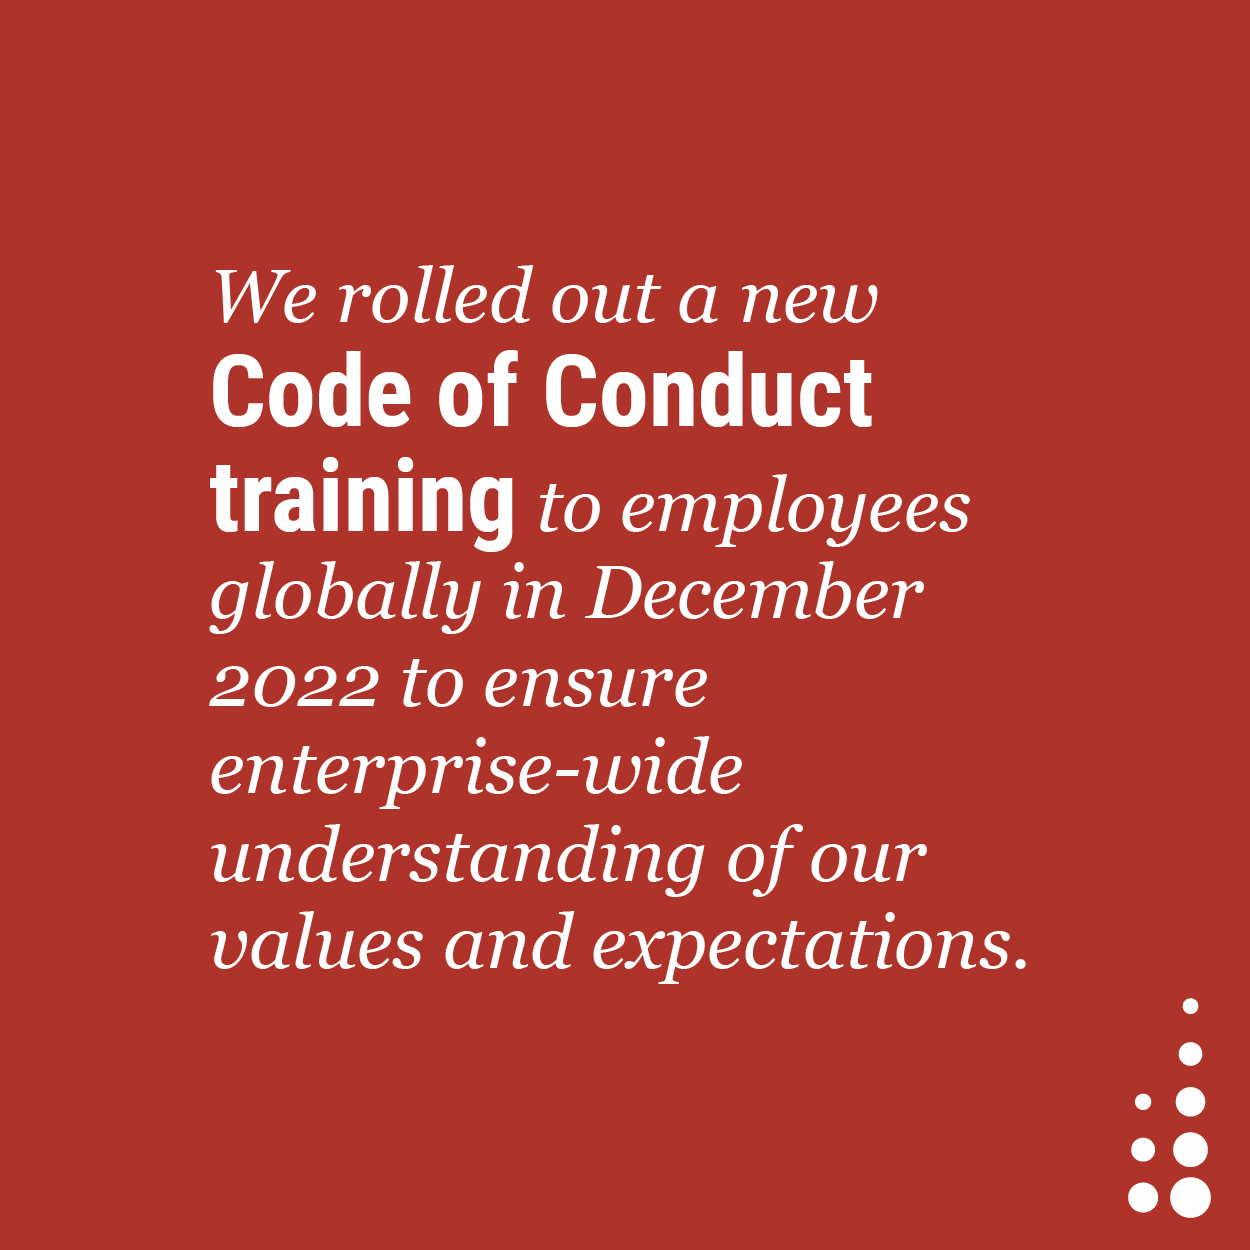 We rolled out a new Code of Conduct training to employees globally in December 2022 to ensure enterprise-wide understanding of our values and expectations.